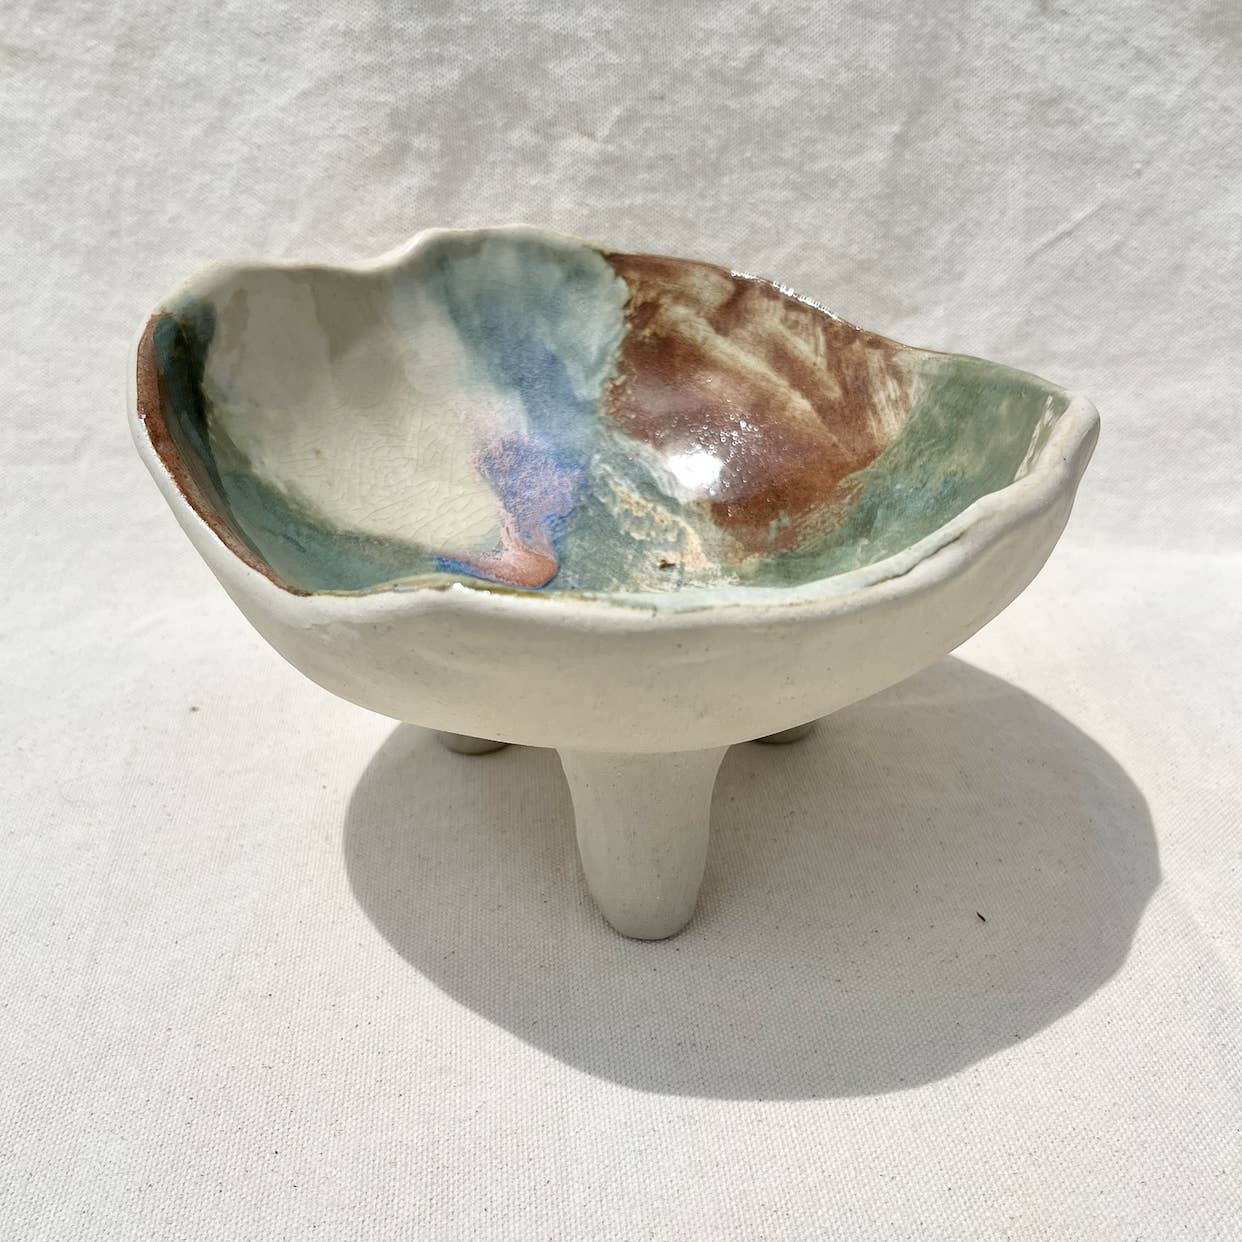 Heavy footed dish made from white clay with a variety of glazes. For your fruit, your jewelry, candles, shared food dish, whatever! Hand built, glazed and fired in San Luis Obispo  by Roaming Barefoot Ceramics.